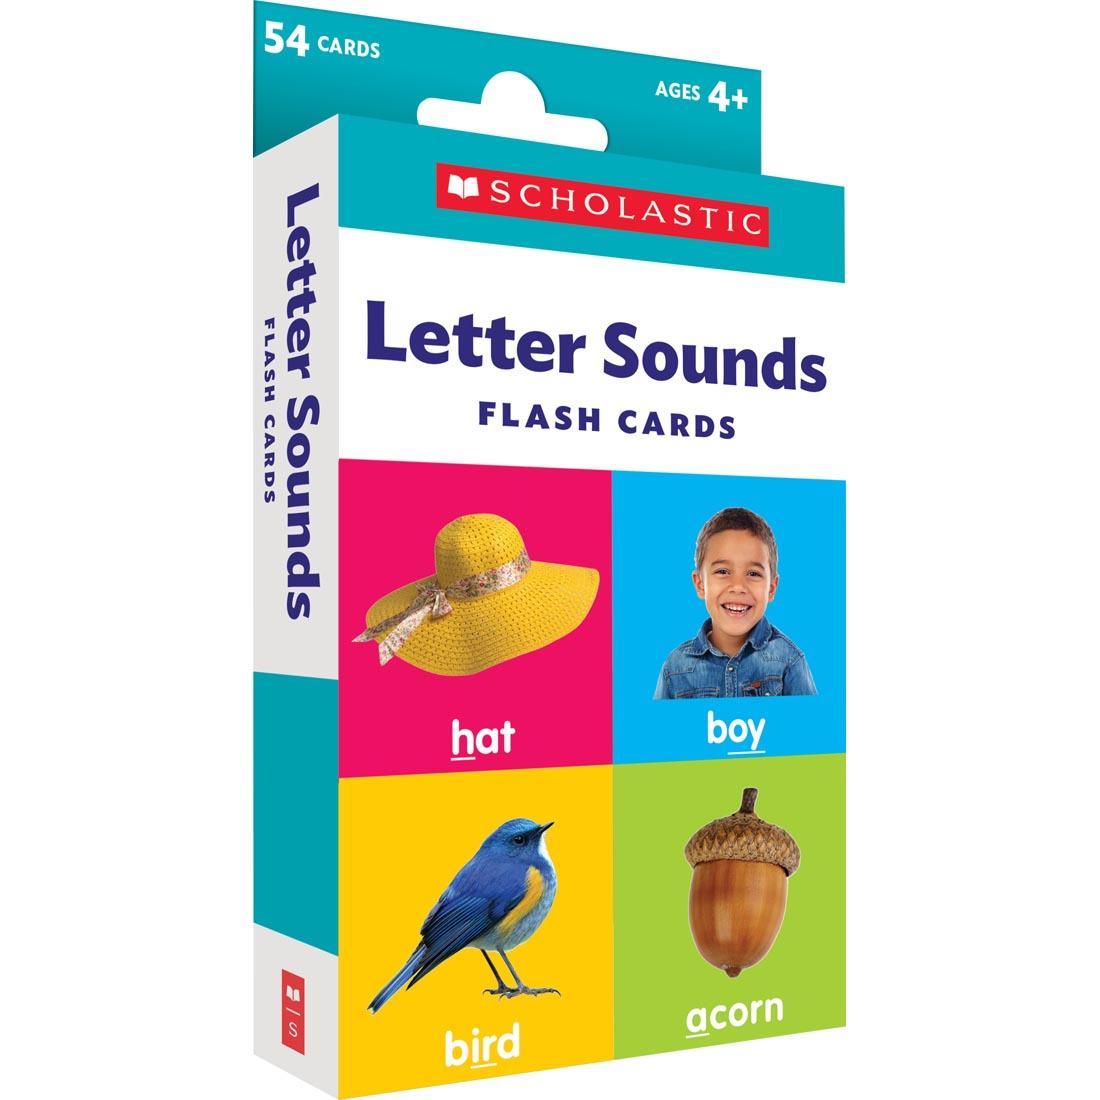 Box for Letter Sounds Flash Cards By Scholastic